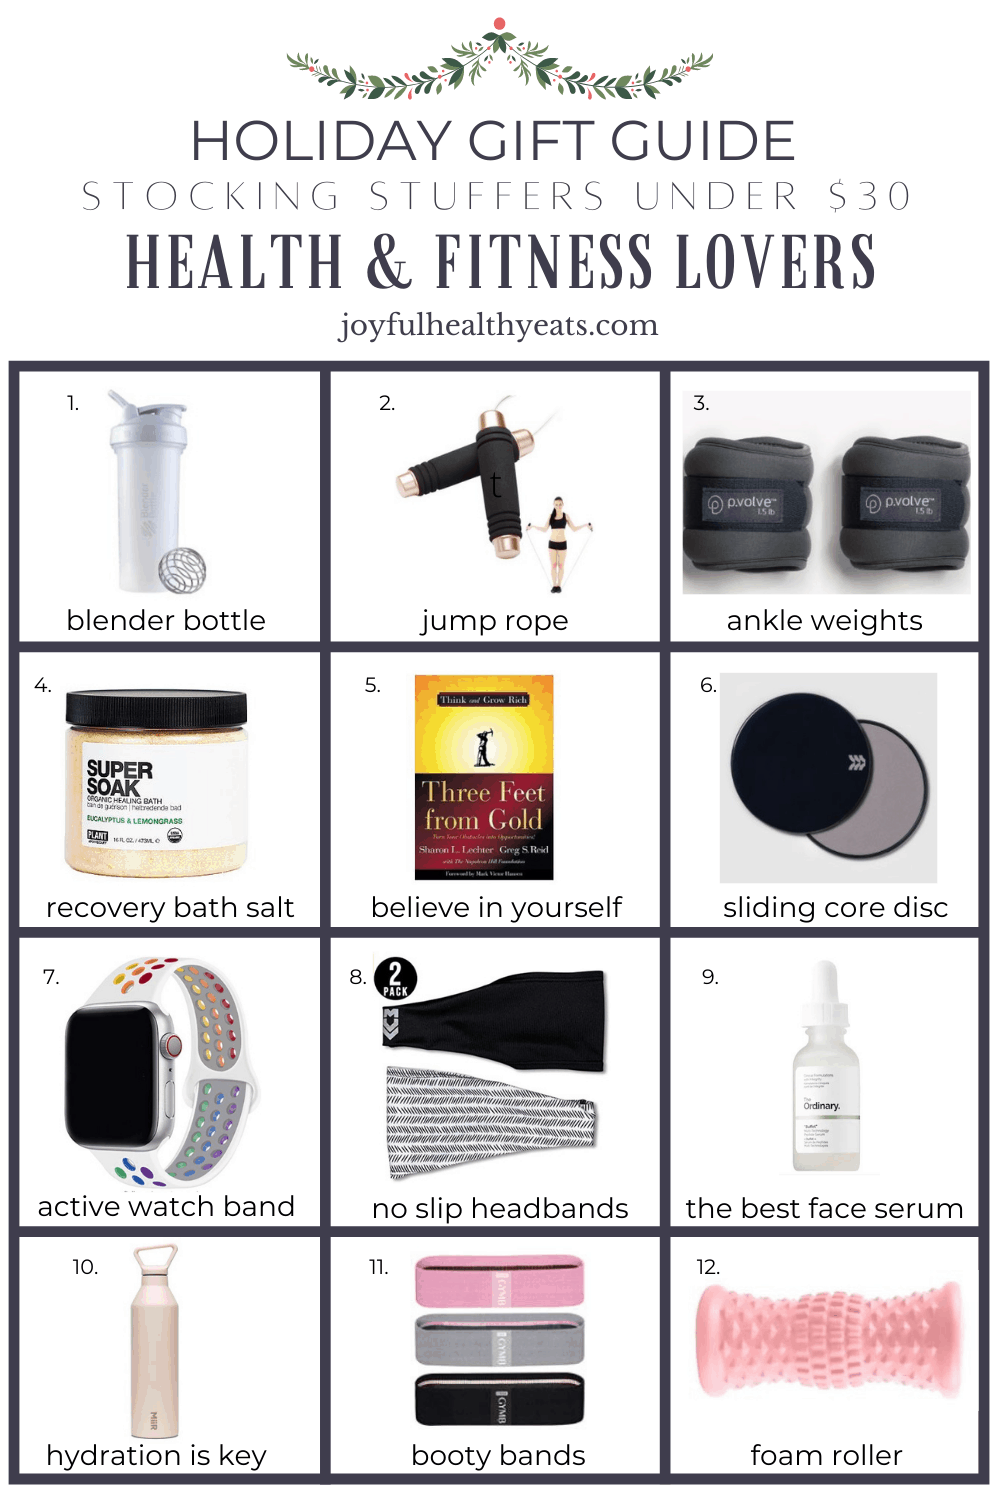 The Gift Guide for the Health & Fitness Lover + Gifts Under $30